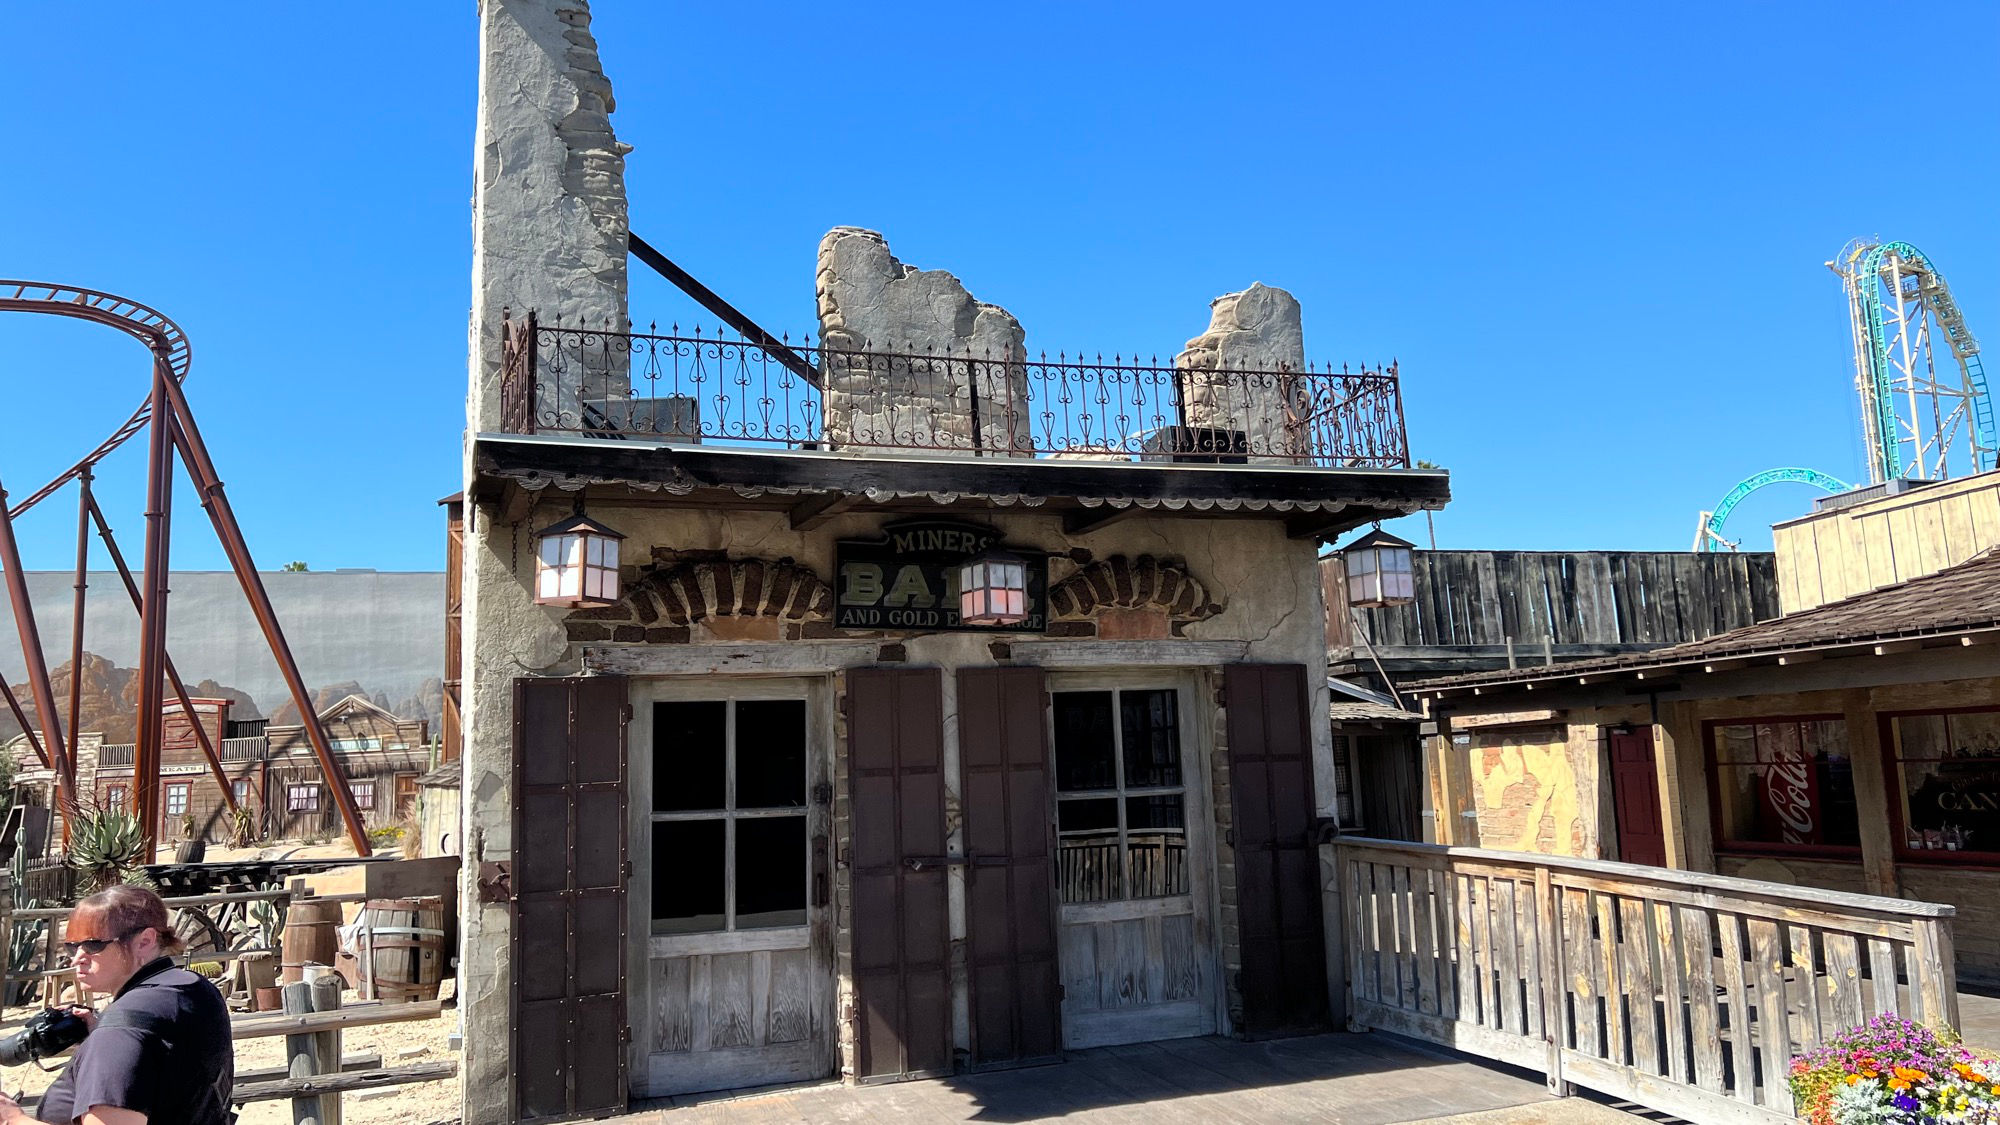 Ghost Town Miners' Bank and Gold Exchange